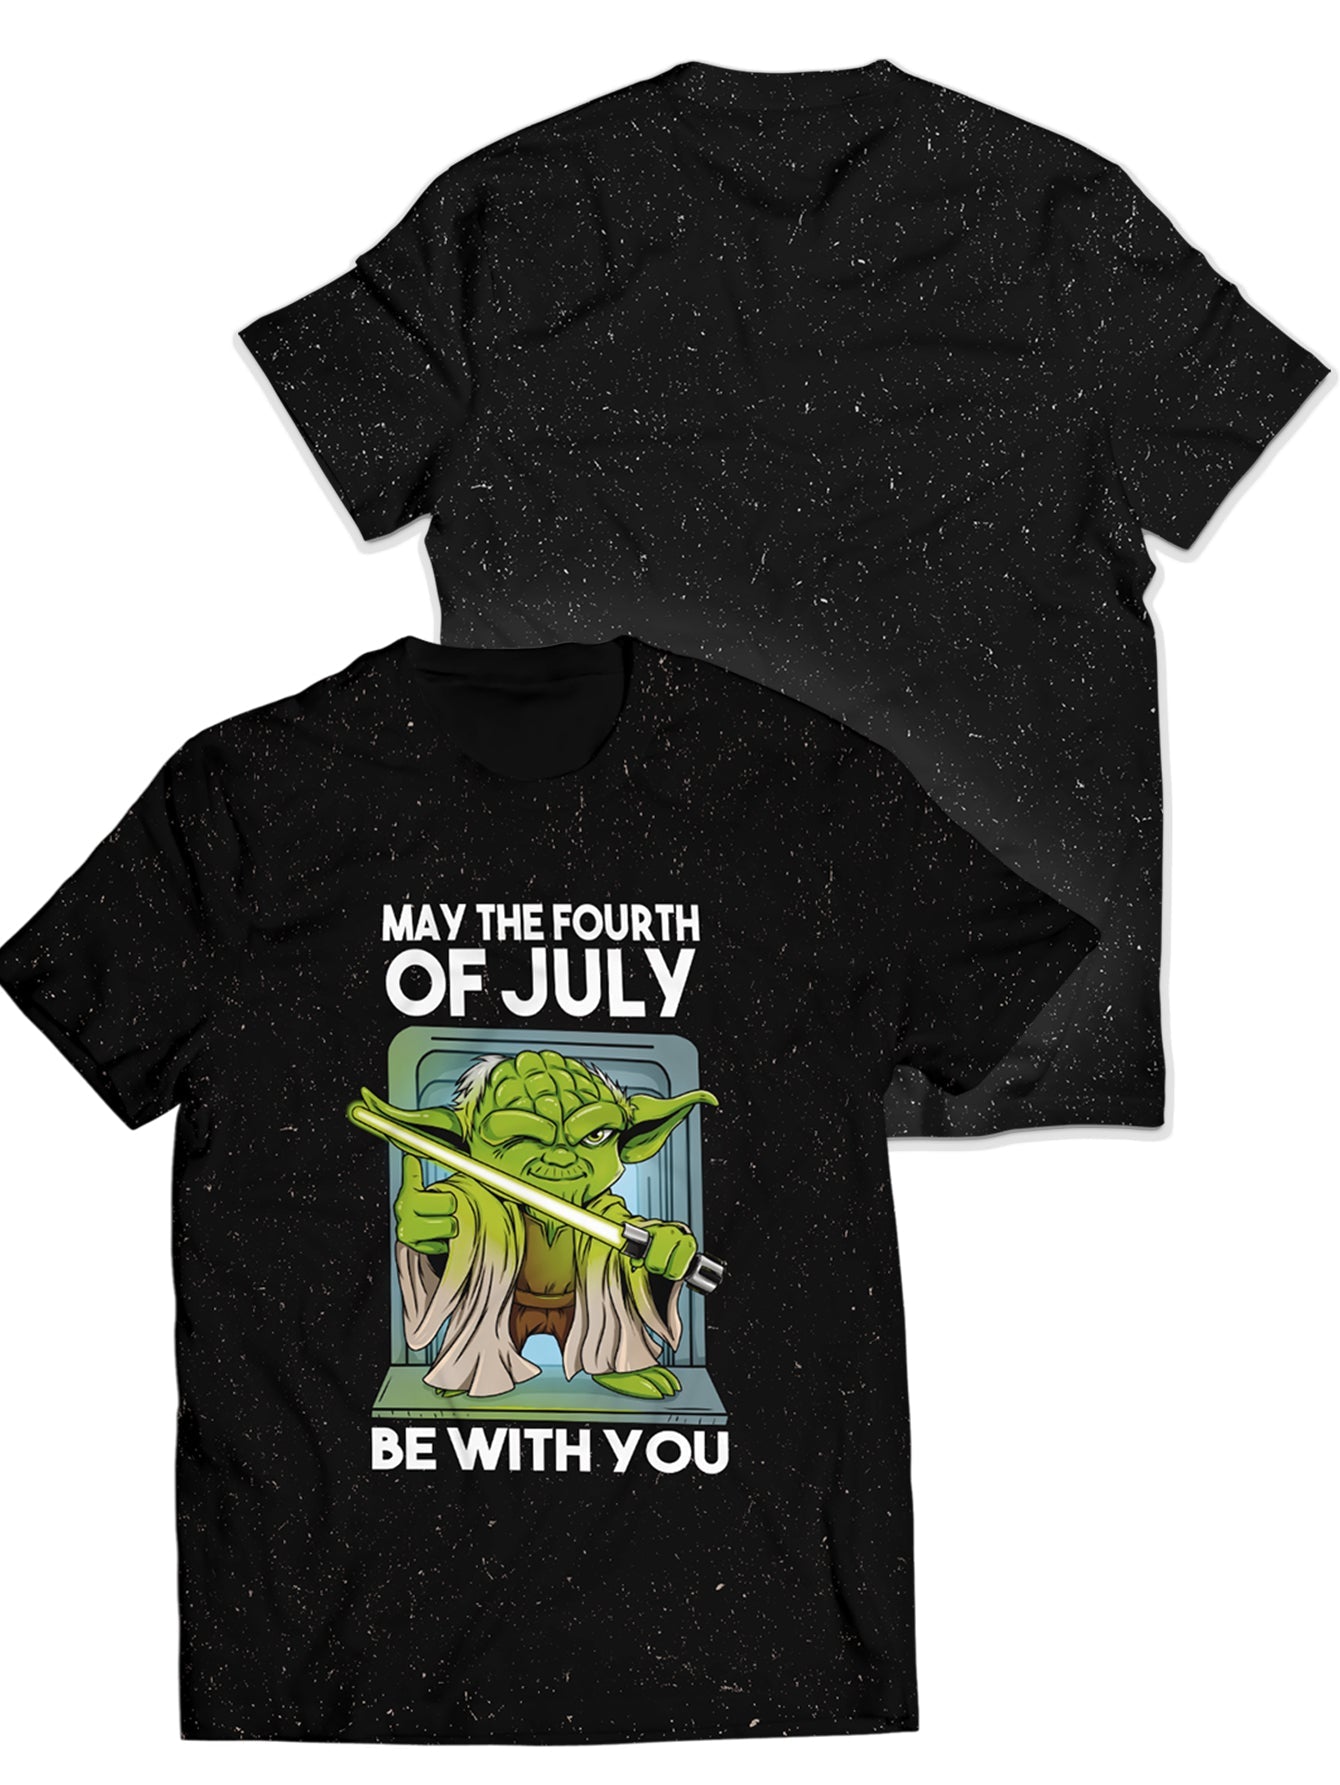 Fandomaniax - May the 4th of July be with you Unisex T-Shirt